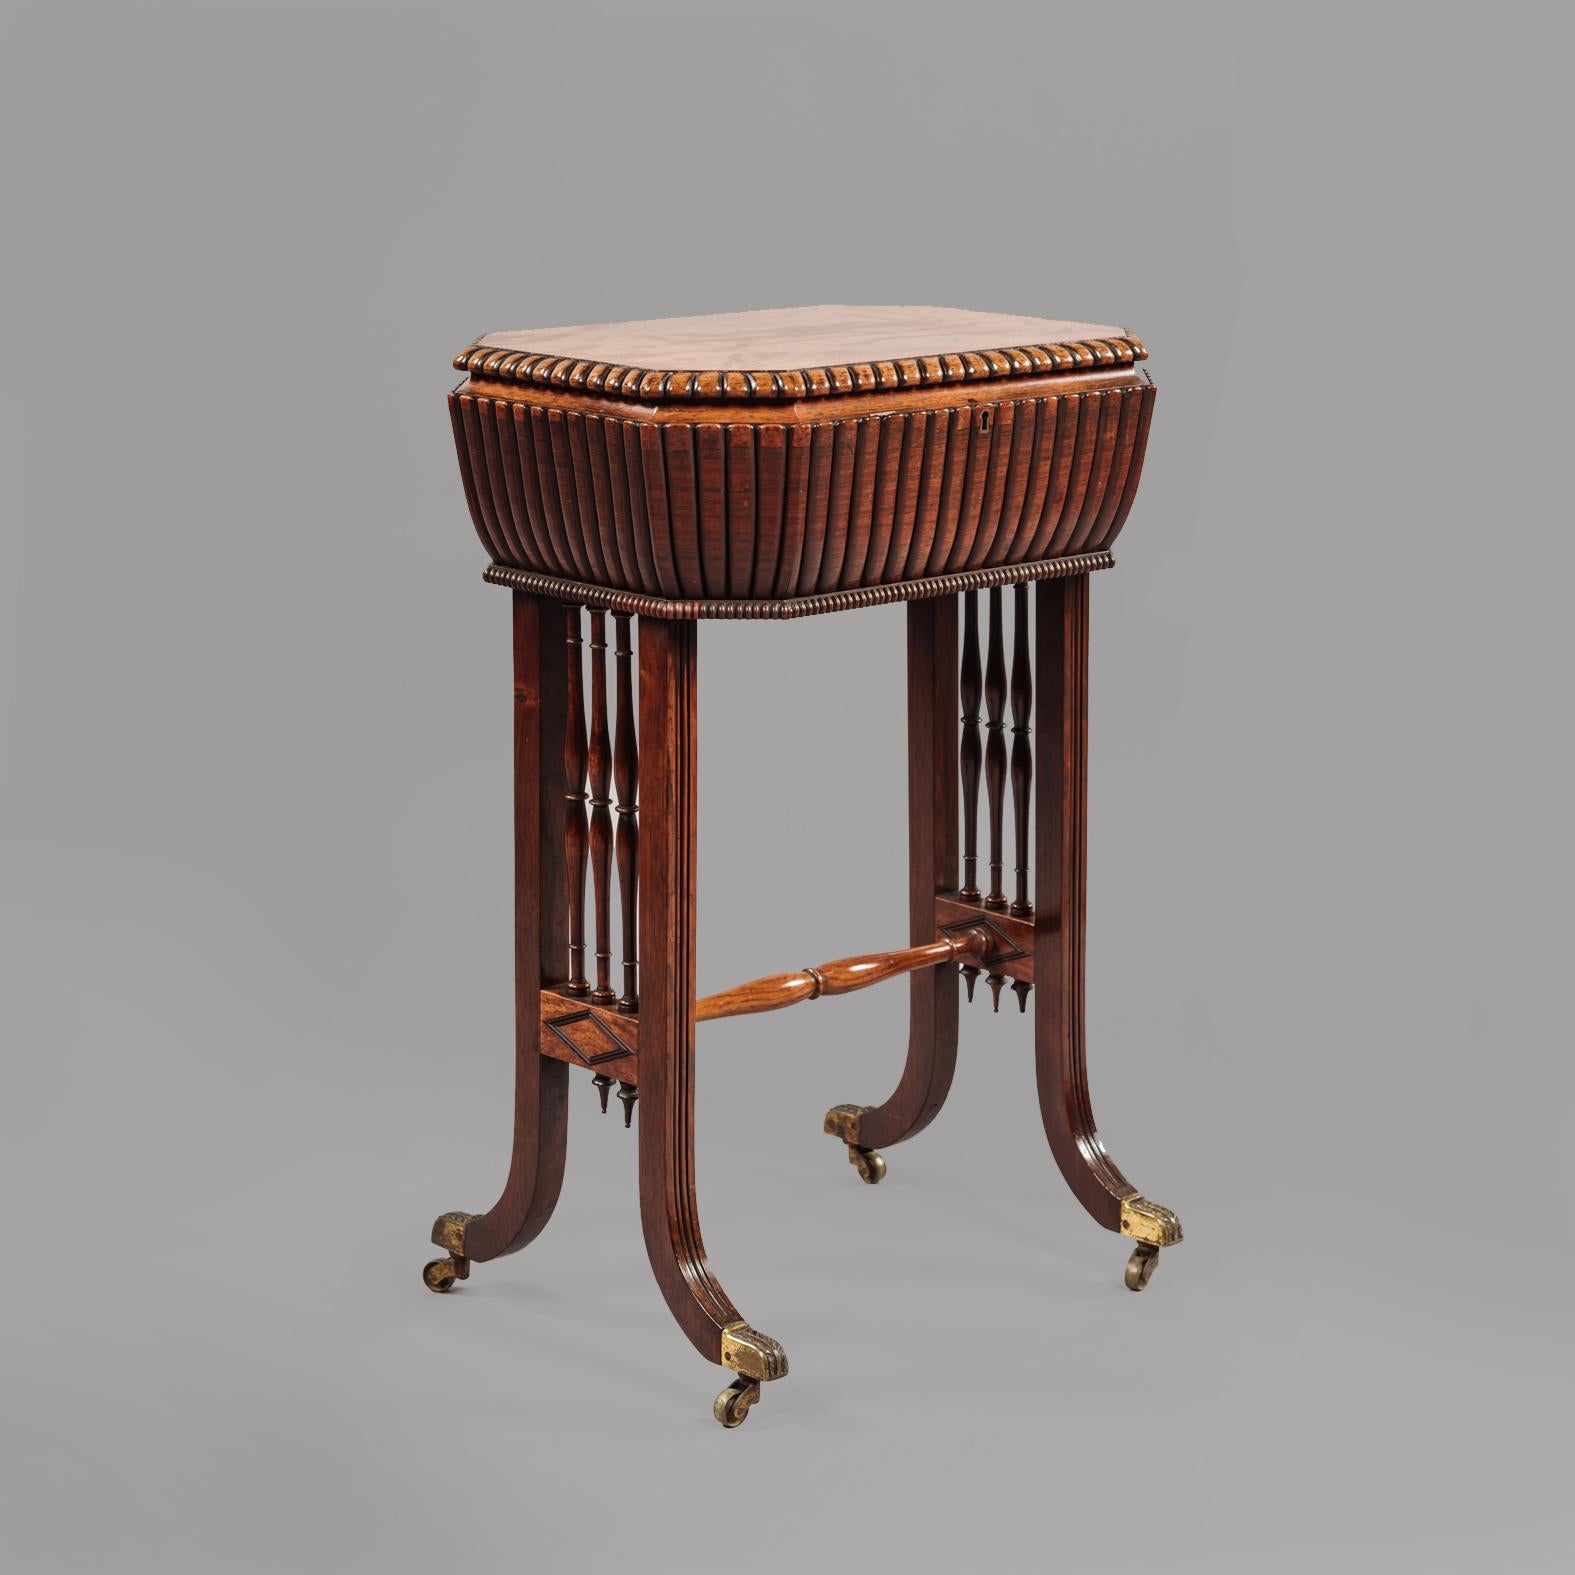 A work table in the manner of Gillows.

The hinged lobed sarcophagus compartment enclosing a tray and compartments.

Gillows

The name Gillows has been associated with the craft of furniture-making since the reign of George II. Gillows